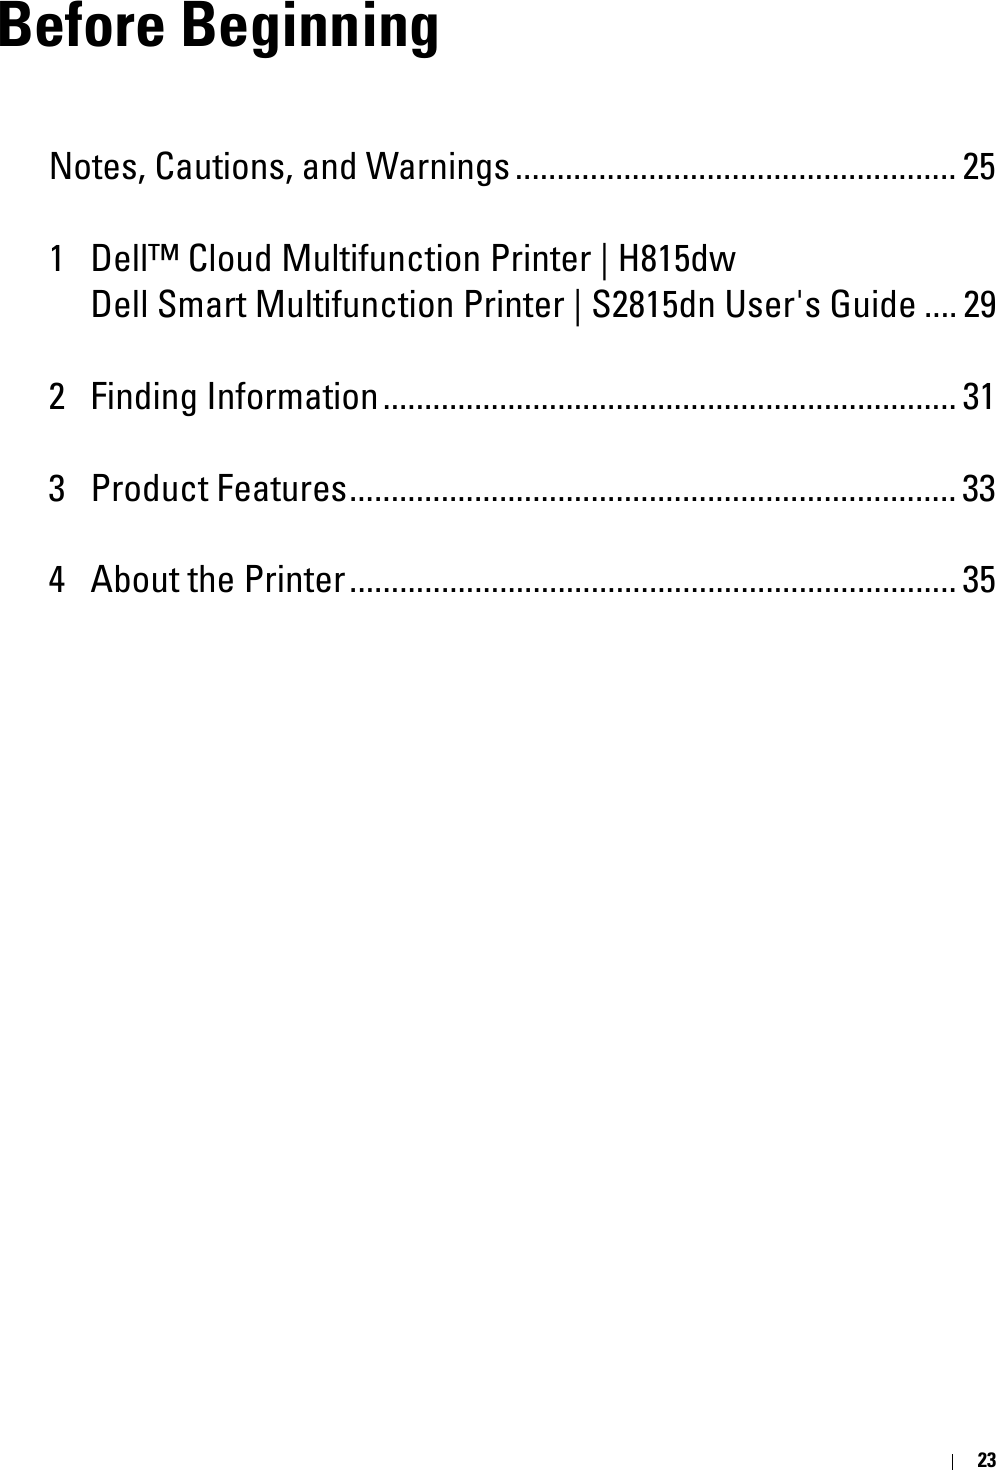 23Before BeginningNotes, Cautions, and Warnings..................................................... 251 Dell™ Cloud Multifunction Printer | H815dw Dell Smart Multifunction Printer | S2815dn User&apos;s Guide .... 292 Finding Information..................................................................... 313 Product Features......................................................................... 334 About the Printer......................................................................... 35